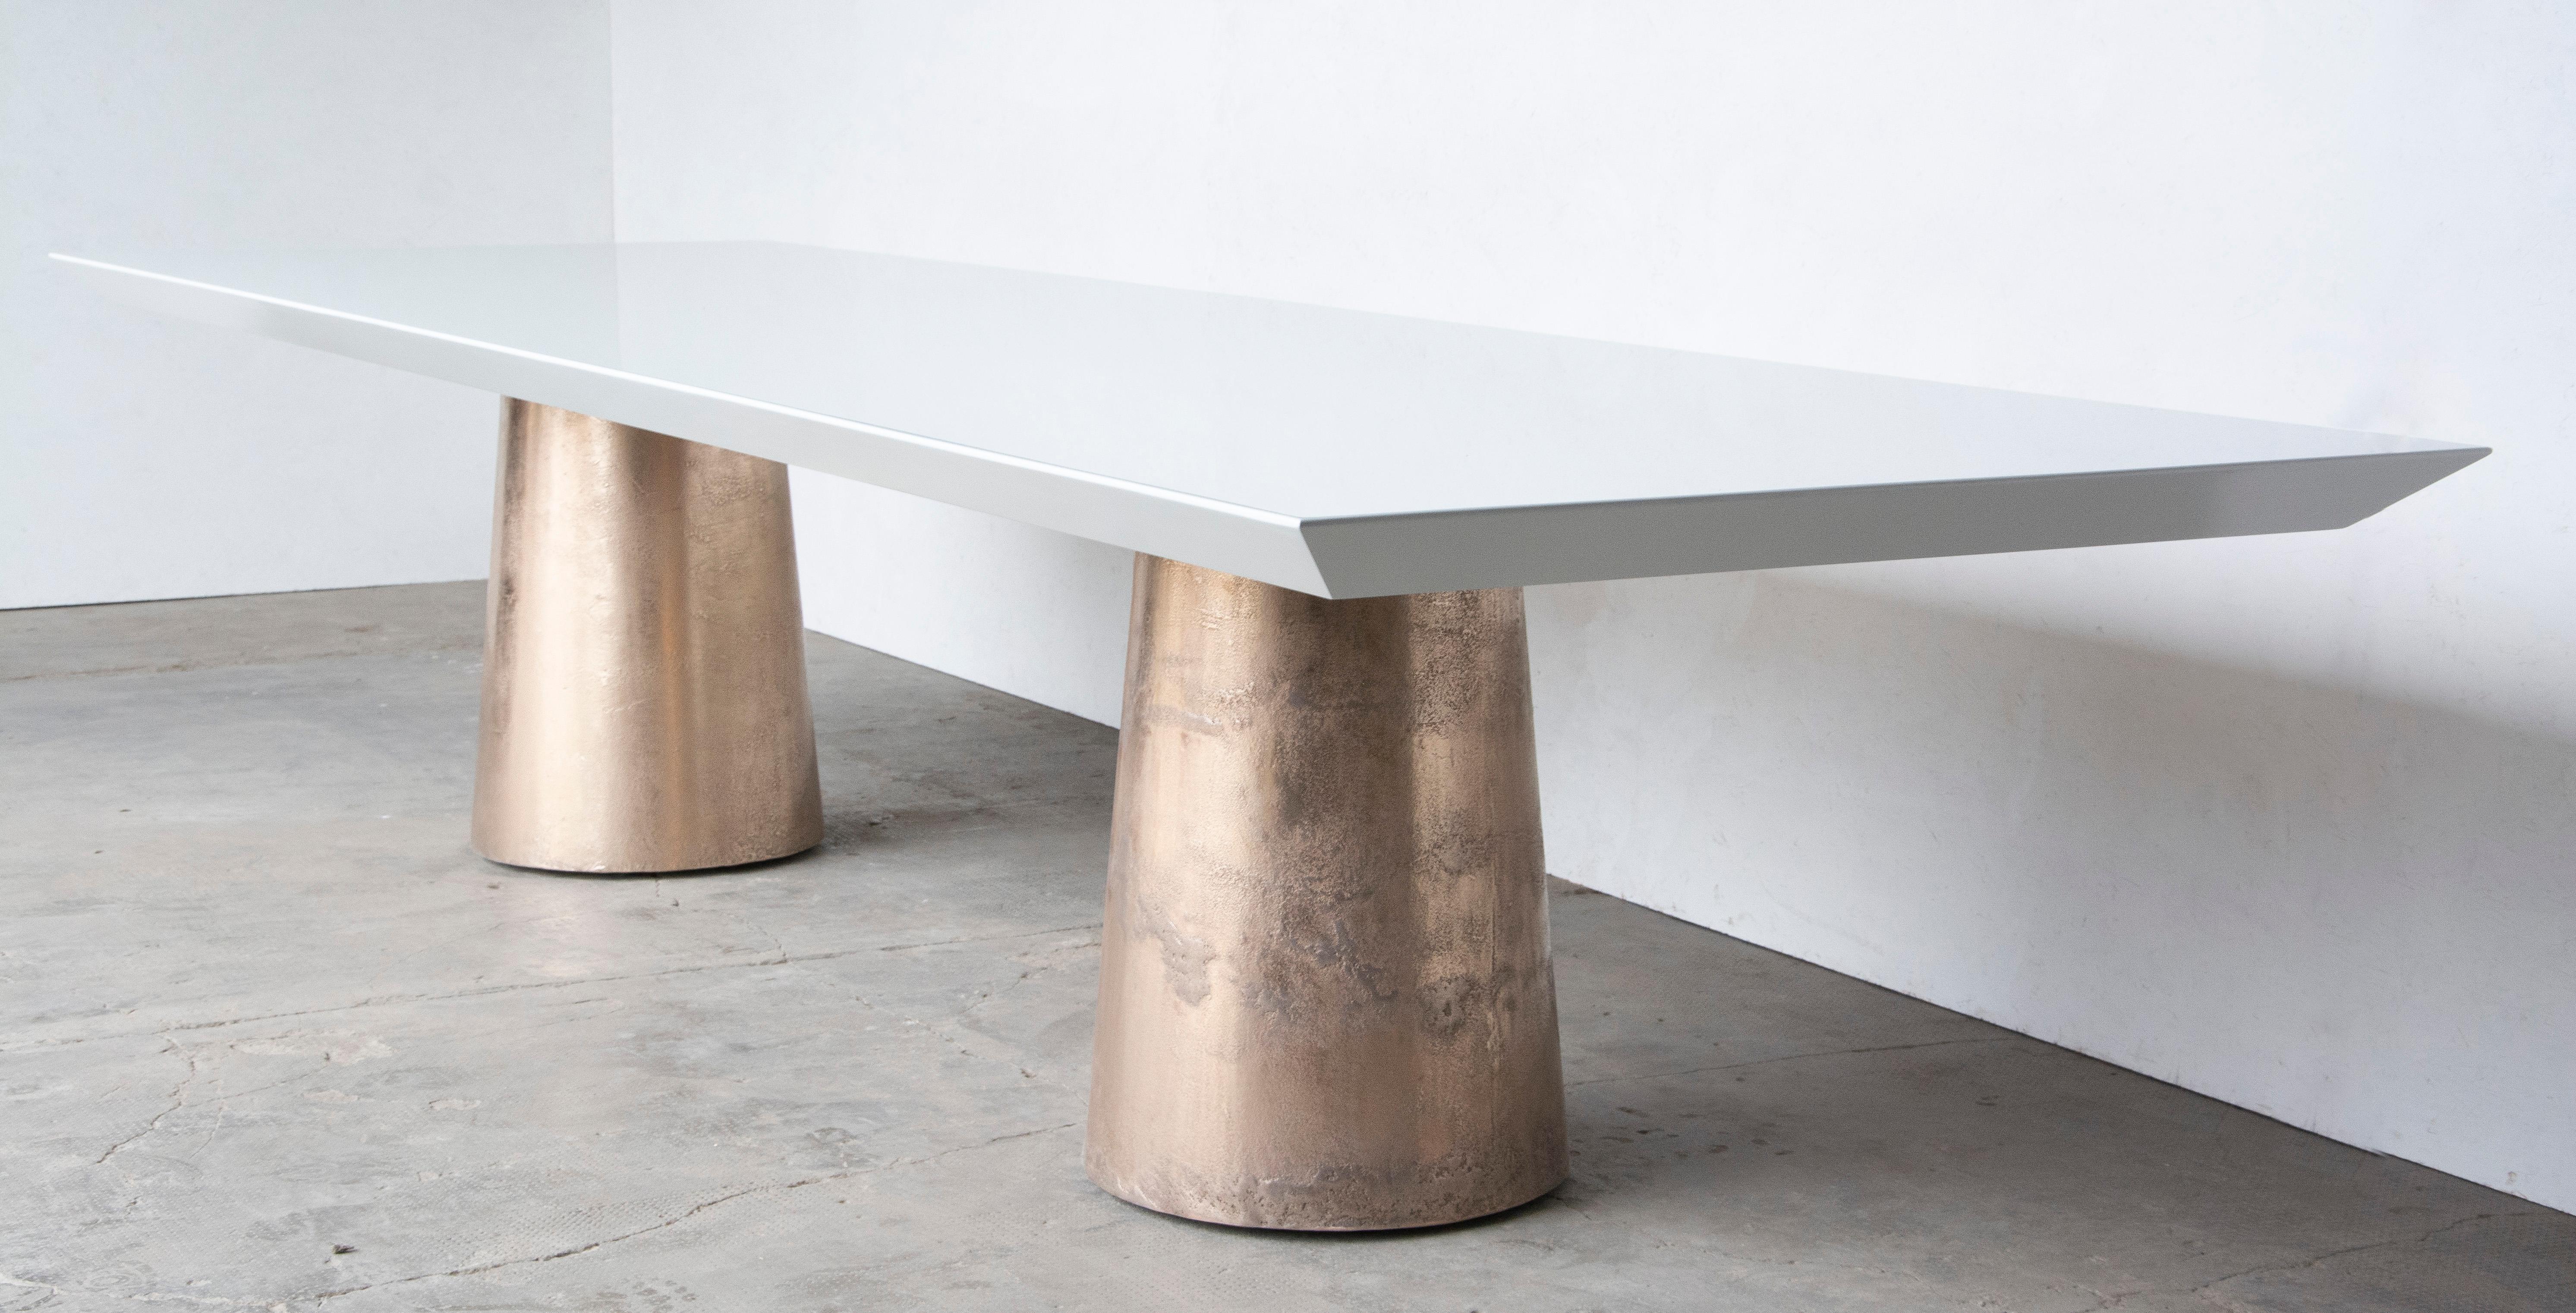 The Benino Table features two cast bronze bases that are only partially polished in order to highlight the imperfections that evidence the burnt earth that once surrounded them during the casting process. Its top, by contrast, is finished smooth and